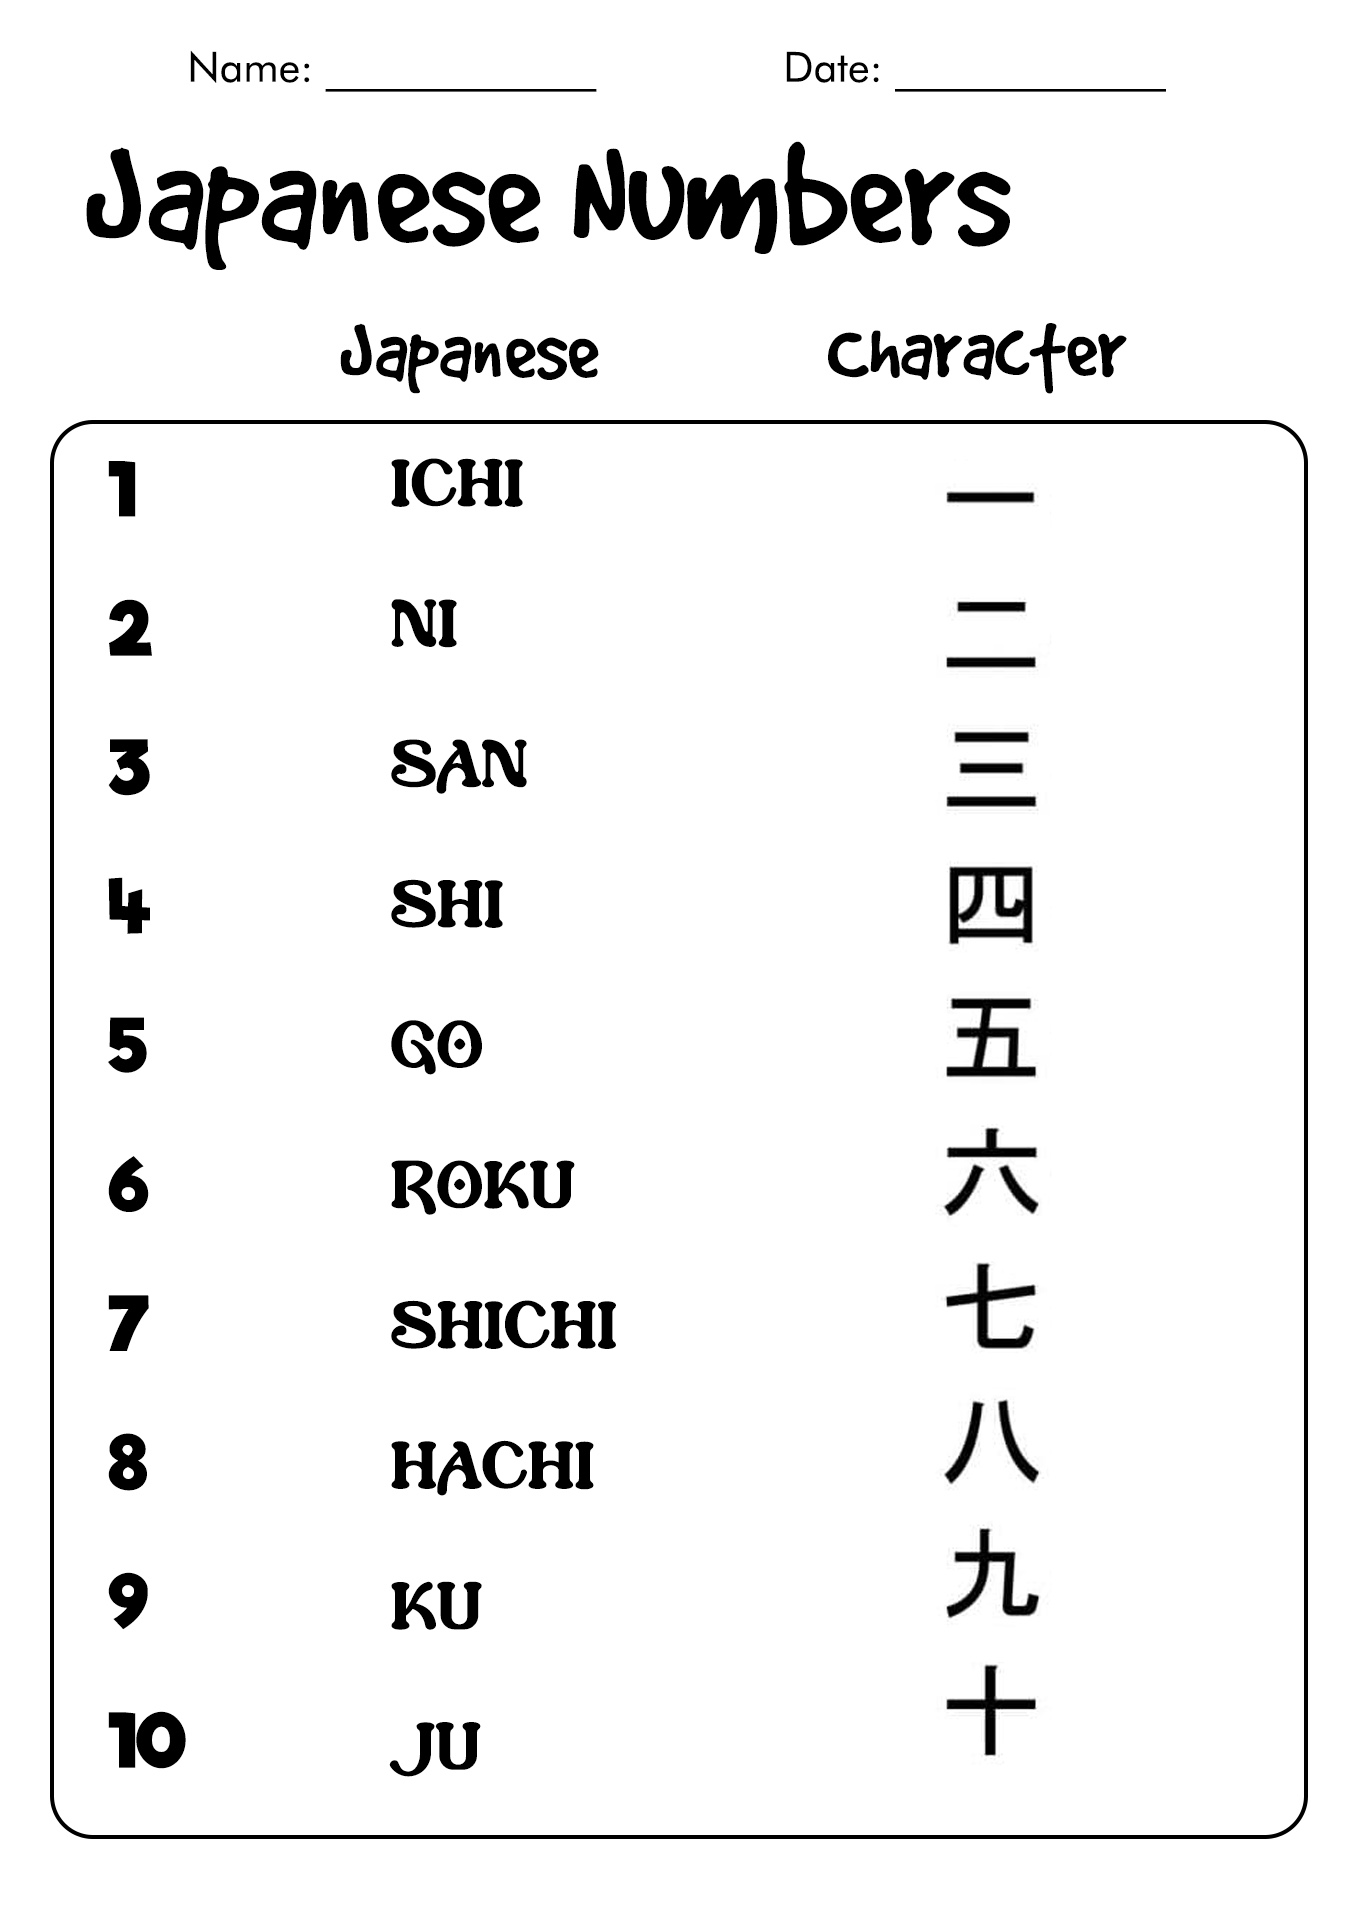 How to Write Japanese Numbers Image